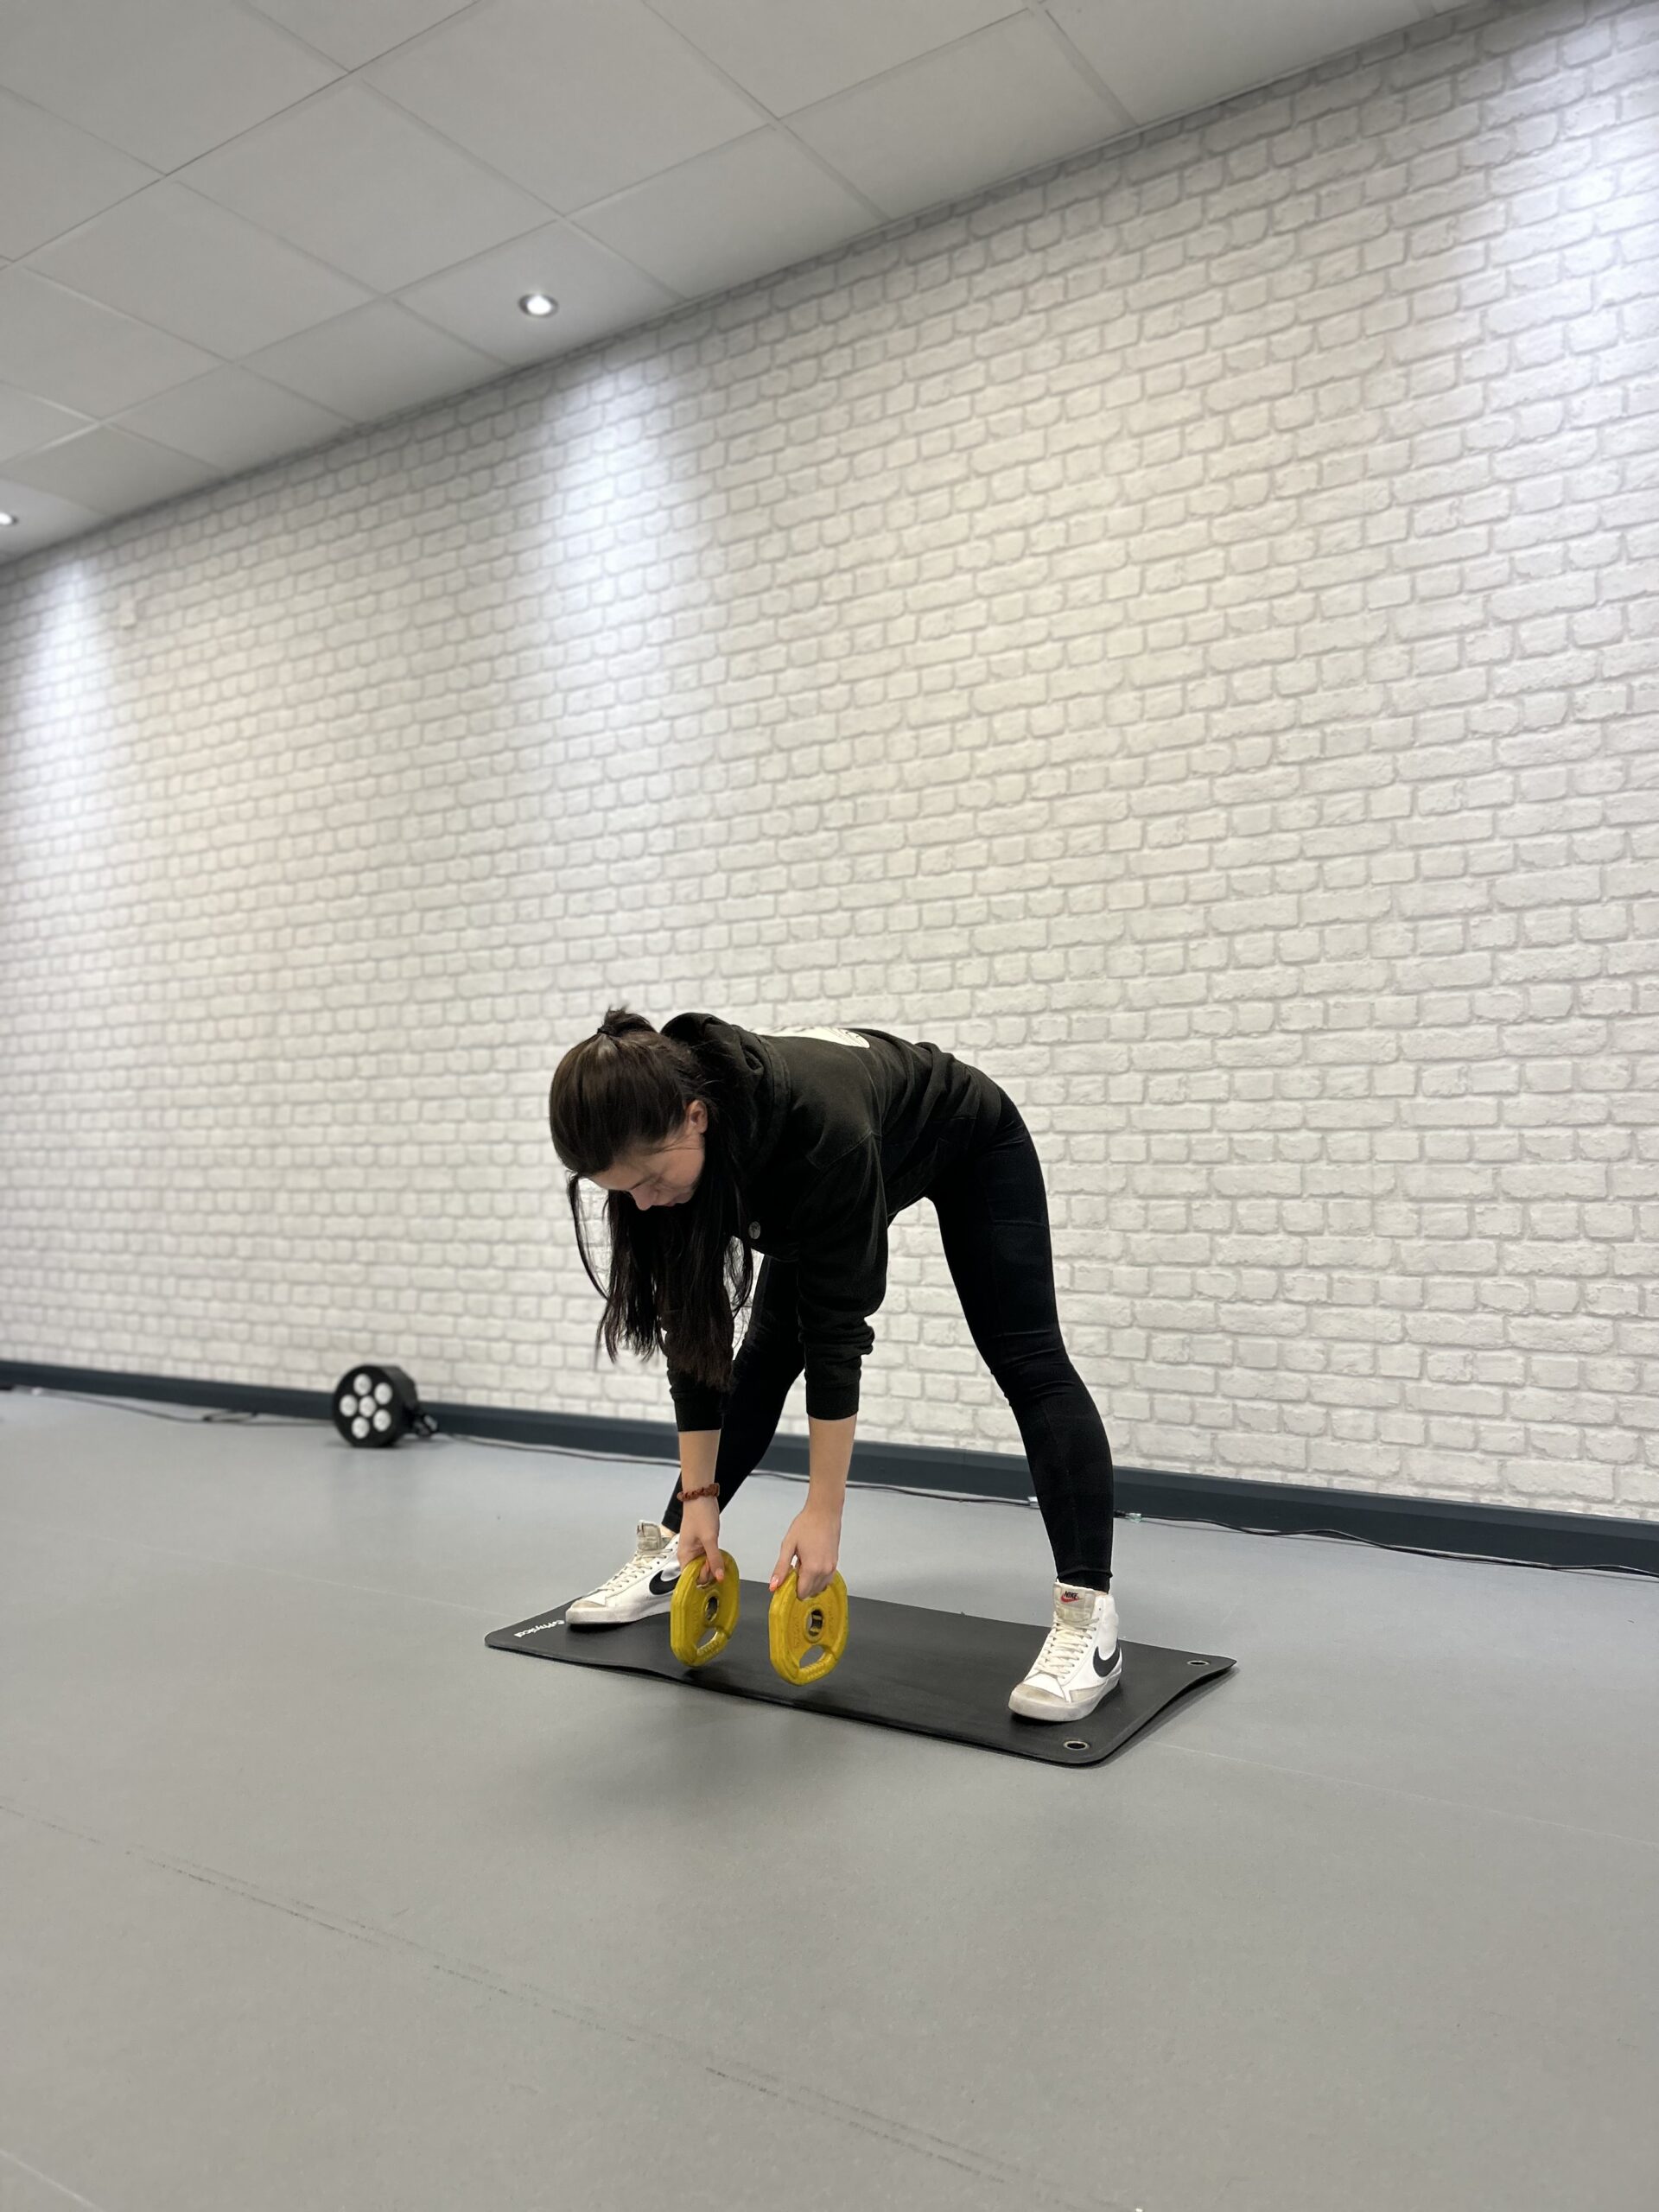 Lateral-lunge-1 - tfd gym